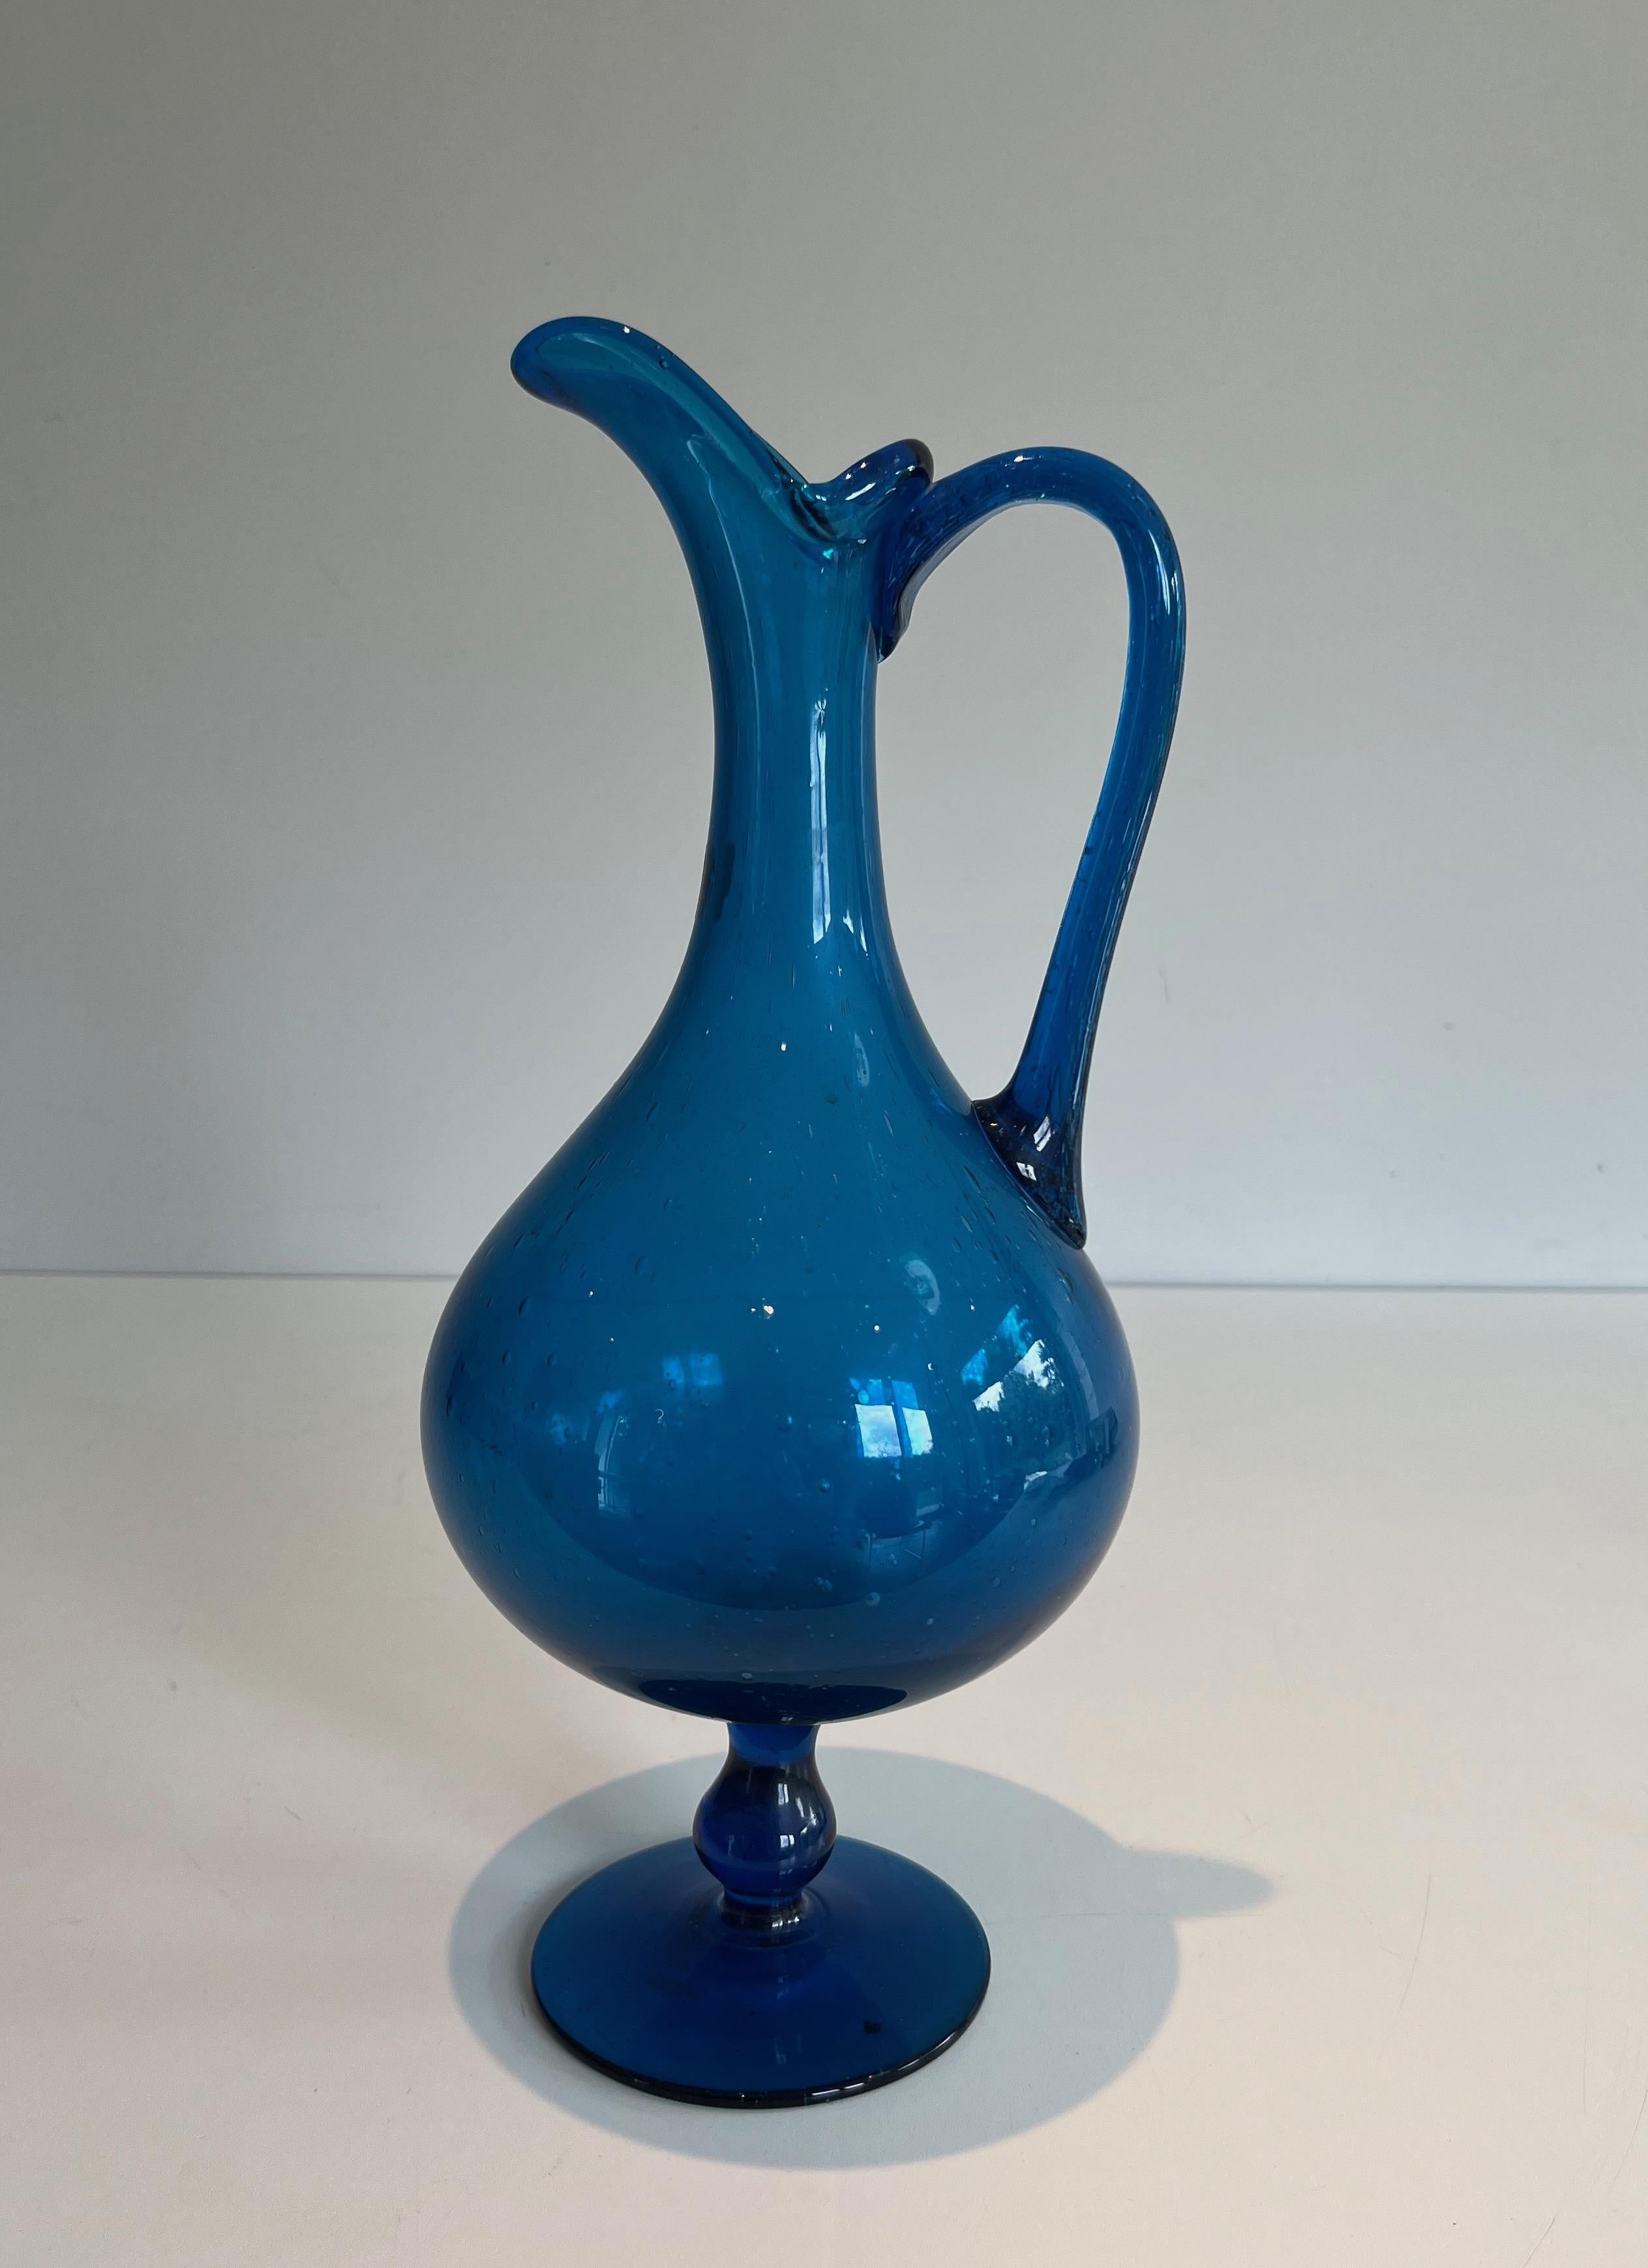 This blueish pitcher is made of glass. This is an Italian firm signed Still Novo (Sticker). Circa 1970